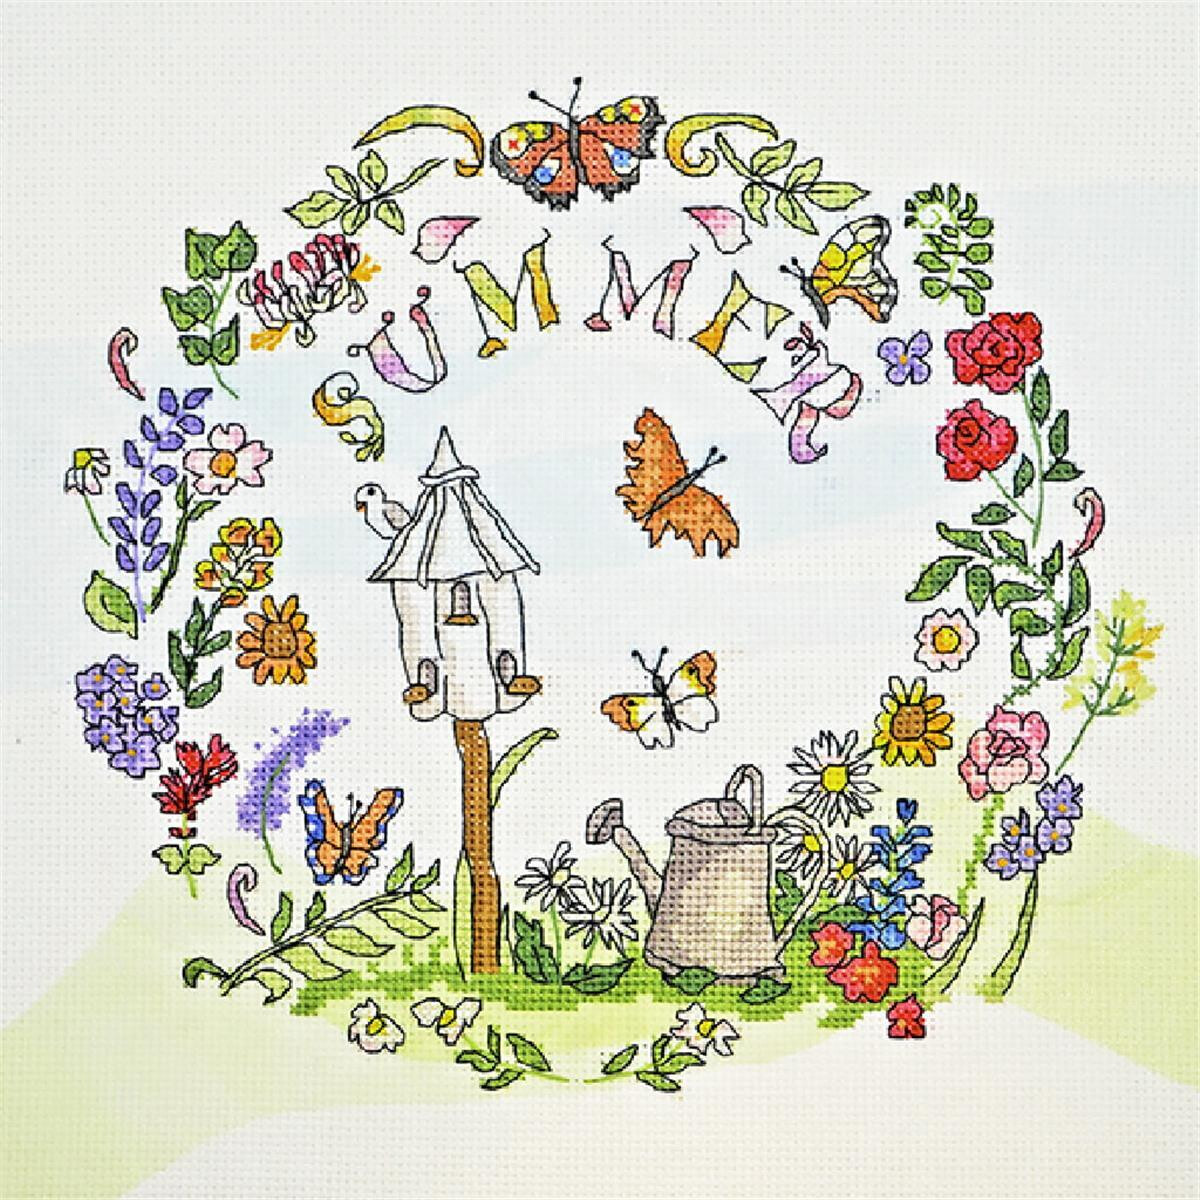 A colorful embroidery illustration or embroidery pack...